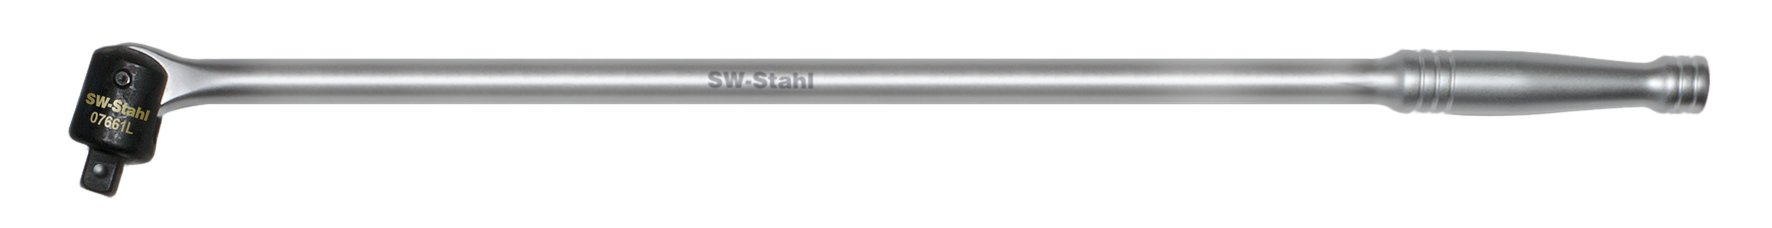 SWSTAHL Jointed heavy-duty handle, 3/4 inch 07661L